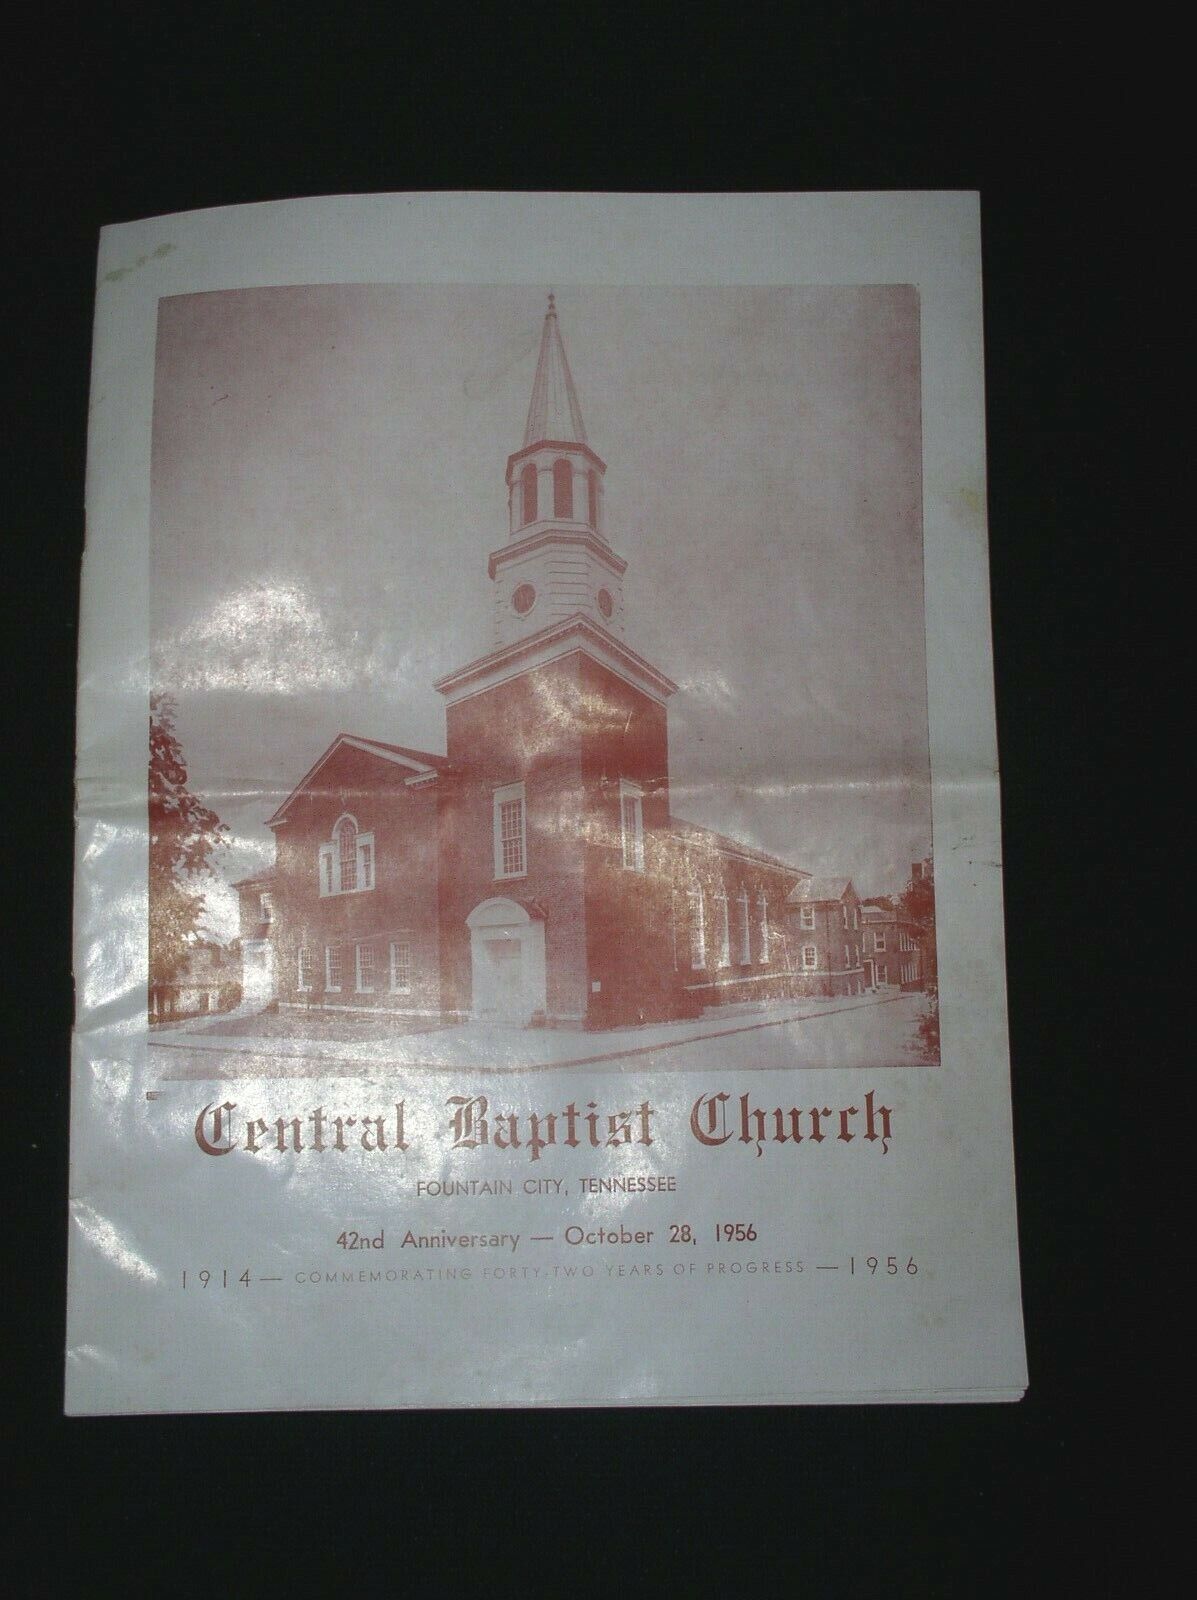 Central Baptist Church, Fountain City, Tennessee~42nd Anniversary, Oct.28, 1956